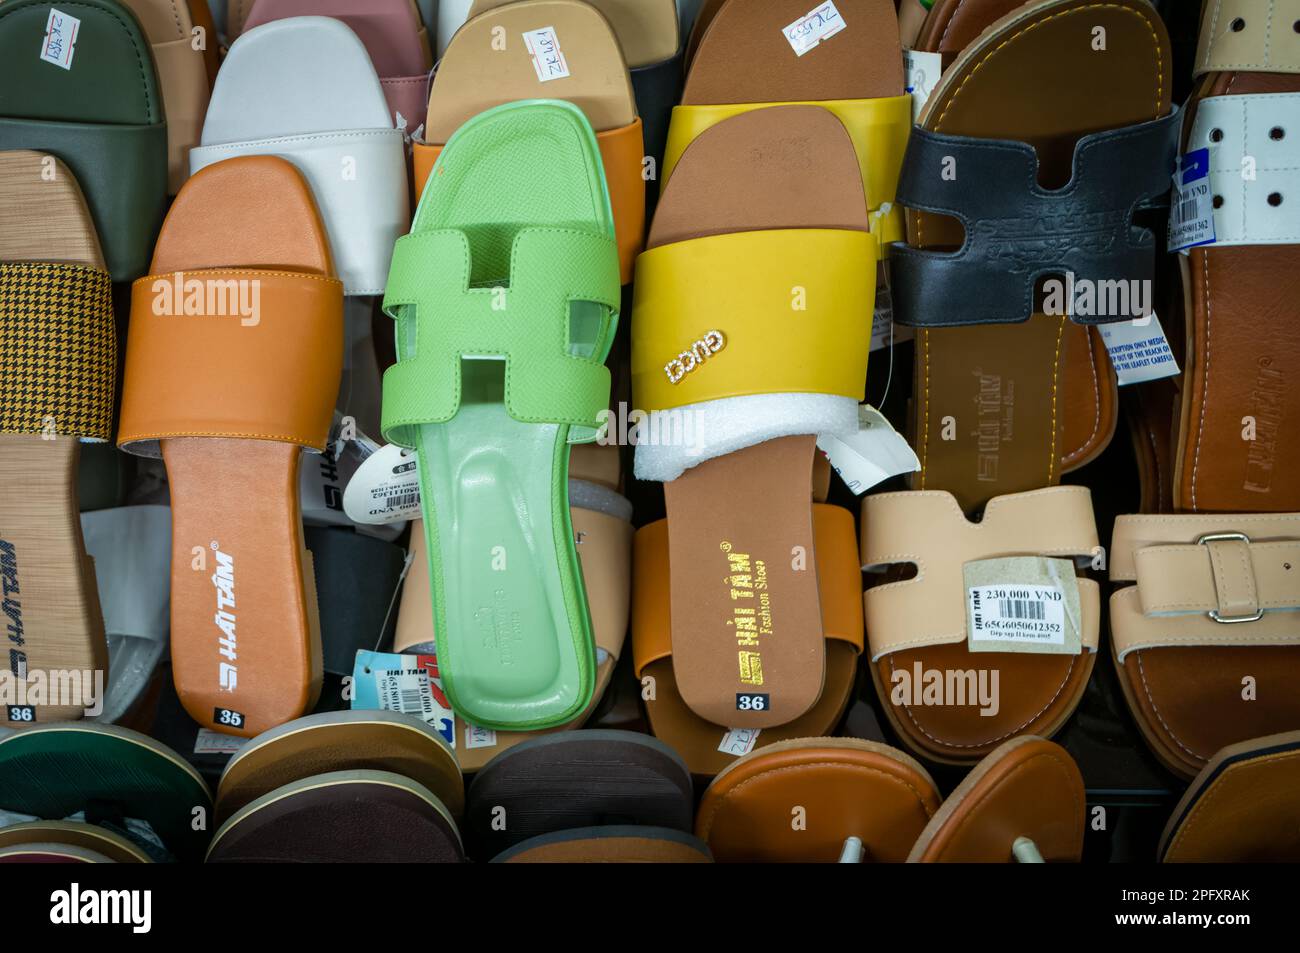 Women's sandals, including fake Gucci branded shoes, for sale in a shoe shop in Dalat, Vietnam. Stock Photo